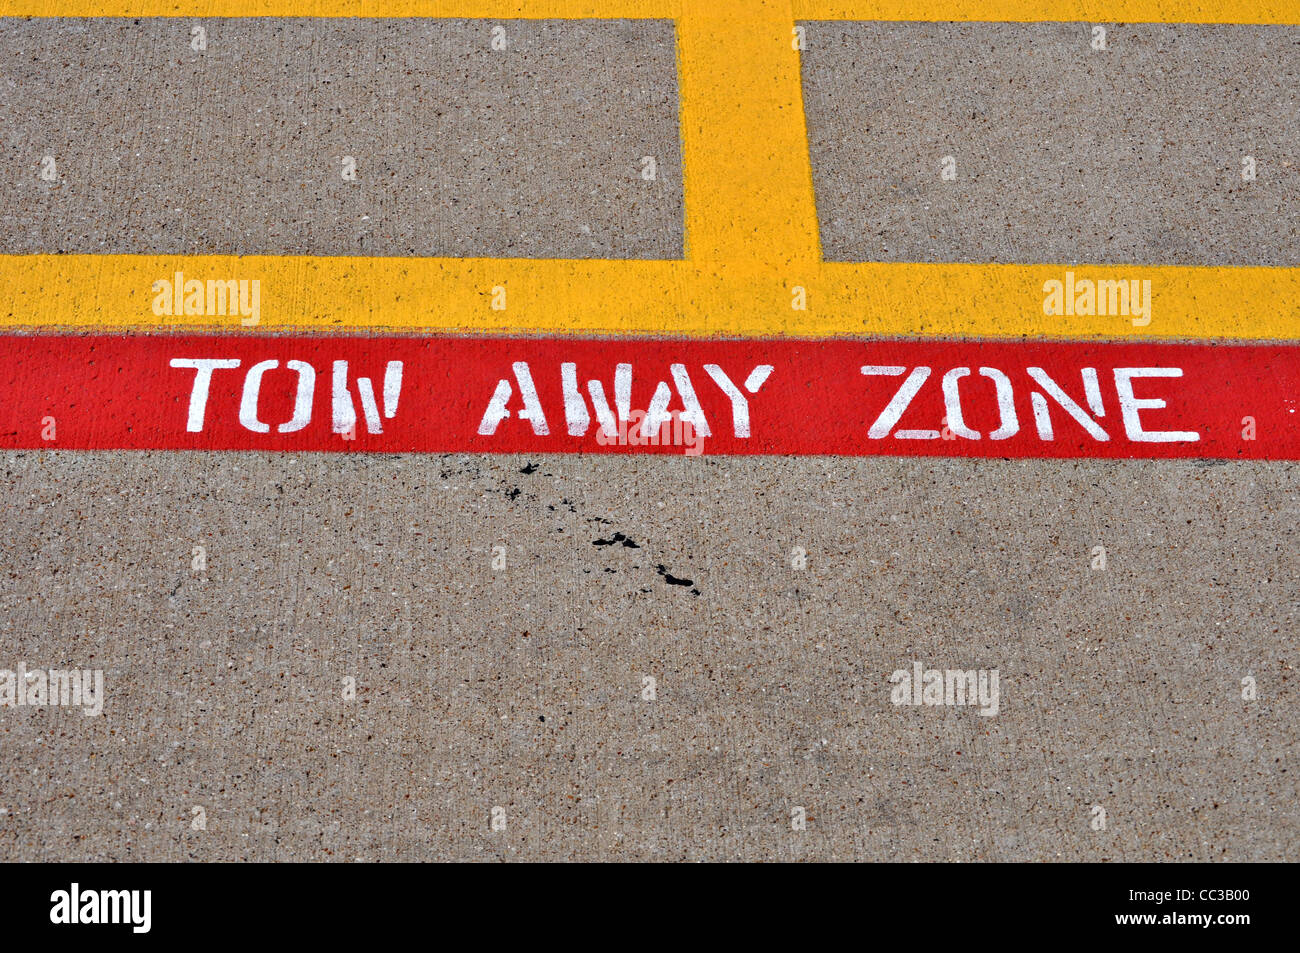 A painted tow away zone sign is painted on cement parking lot. Stock Photo